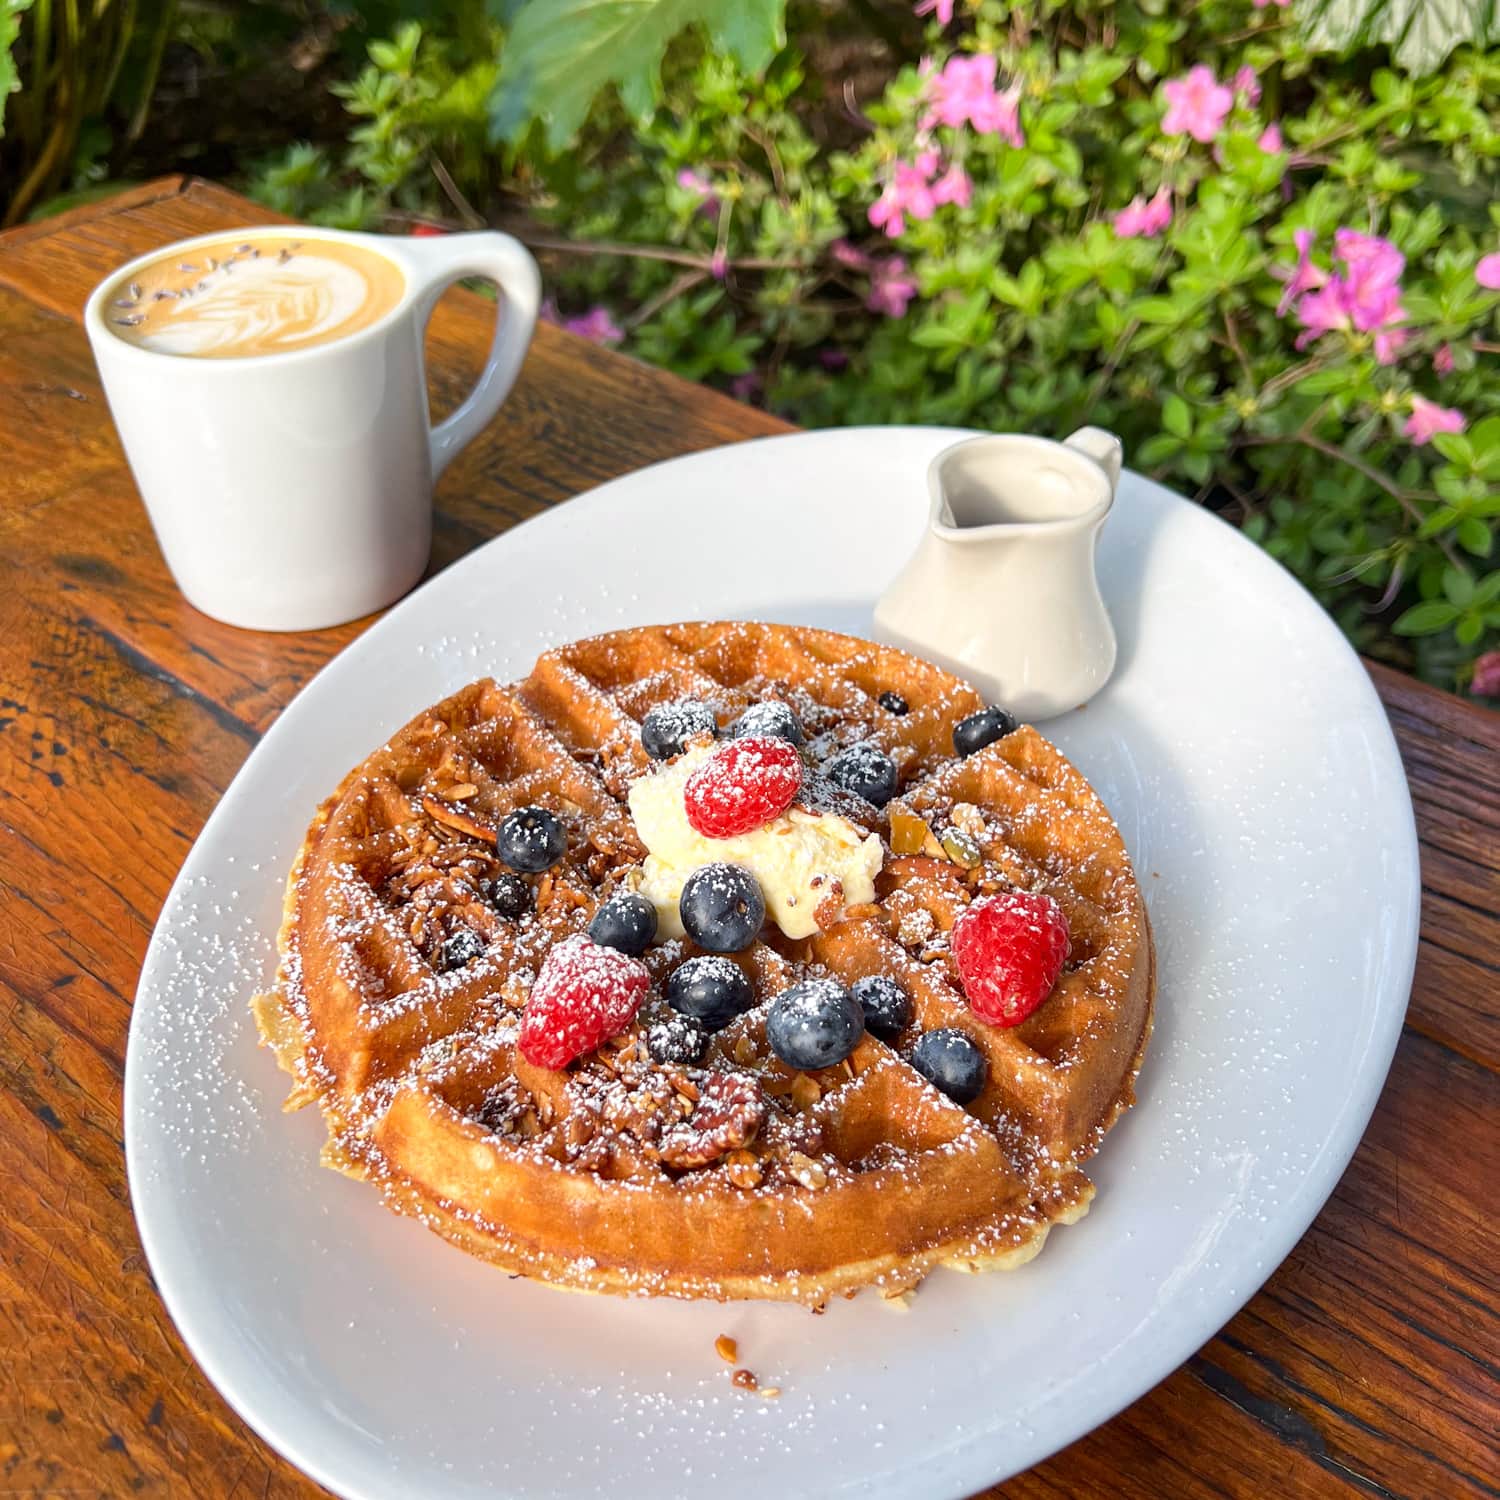 Waffles with berries and a lavender latte at Sunflower Caffe in Sonoma Plaza